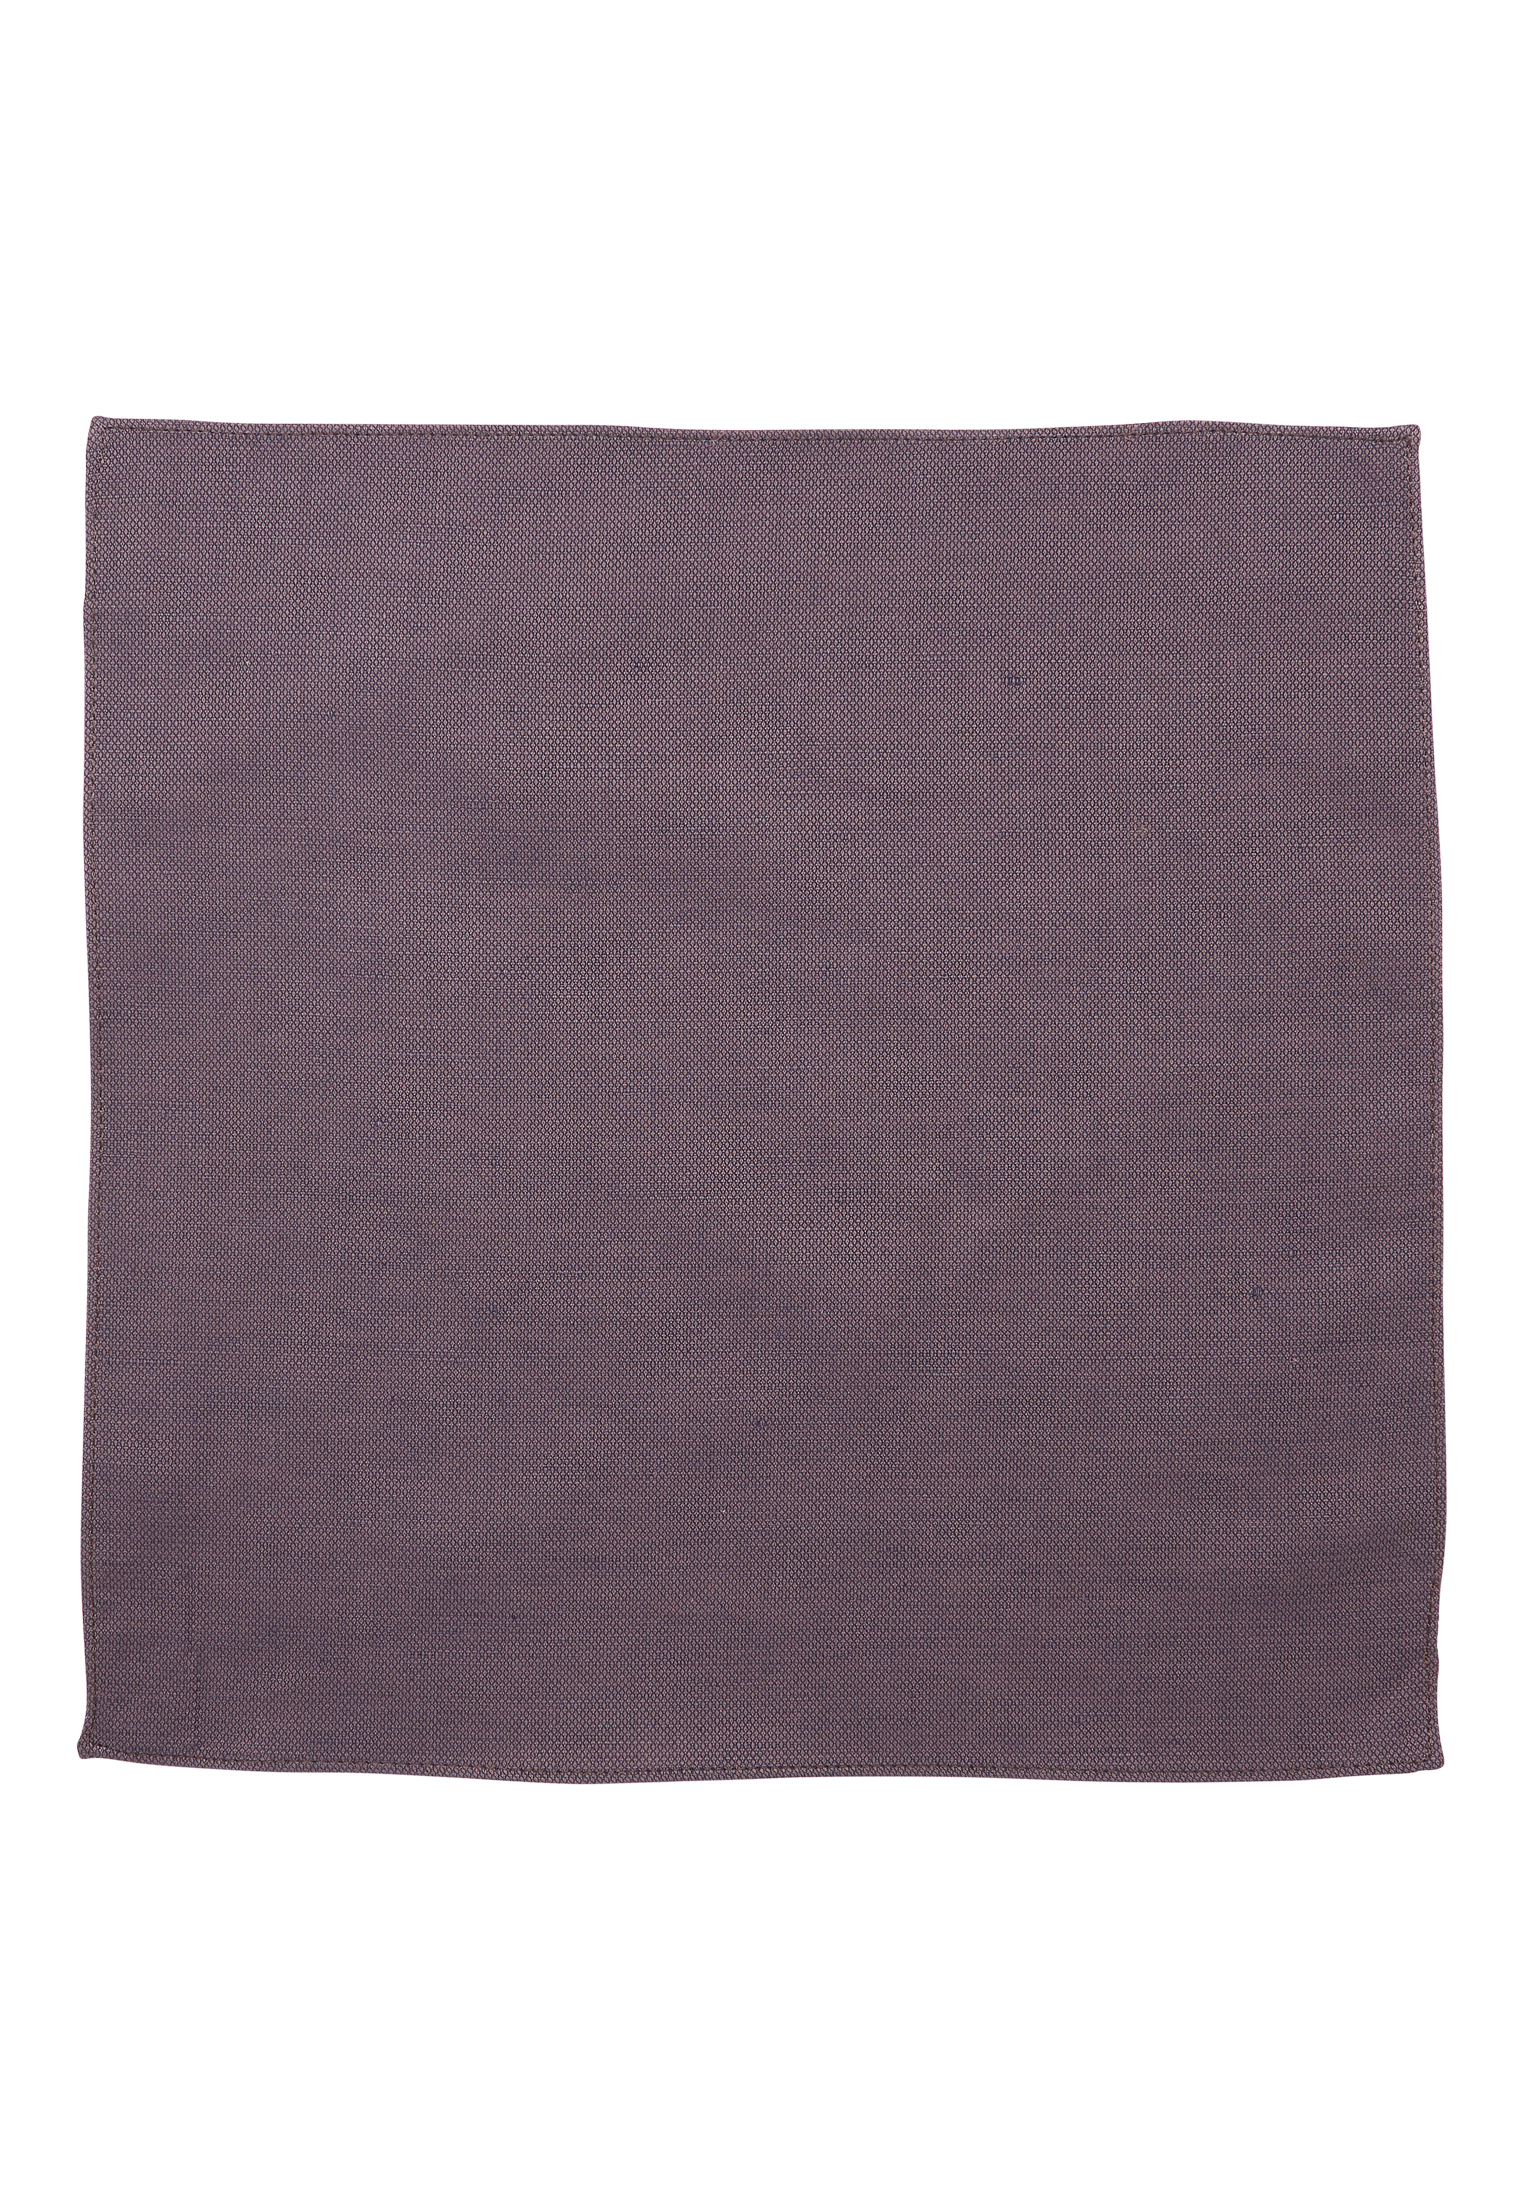 Pocket square in plum structured